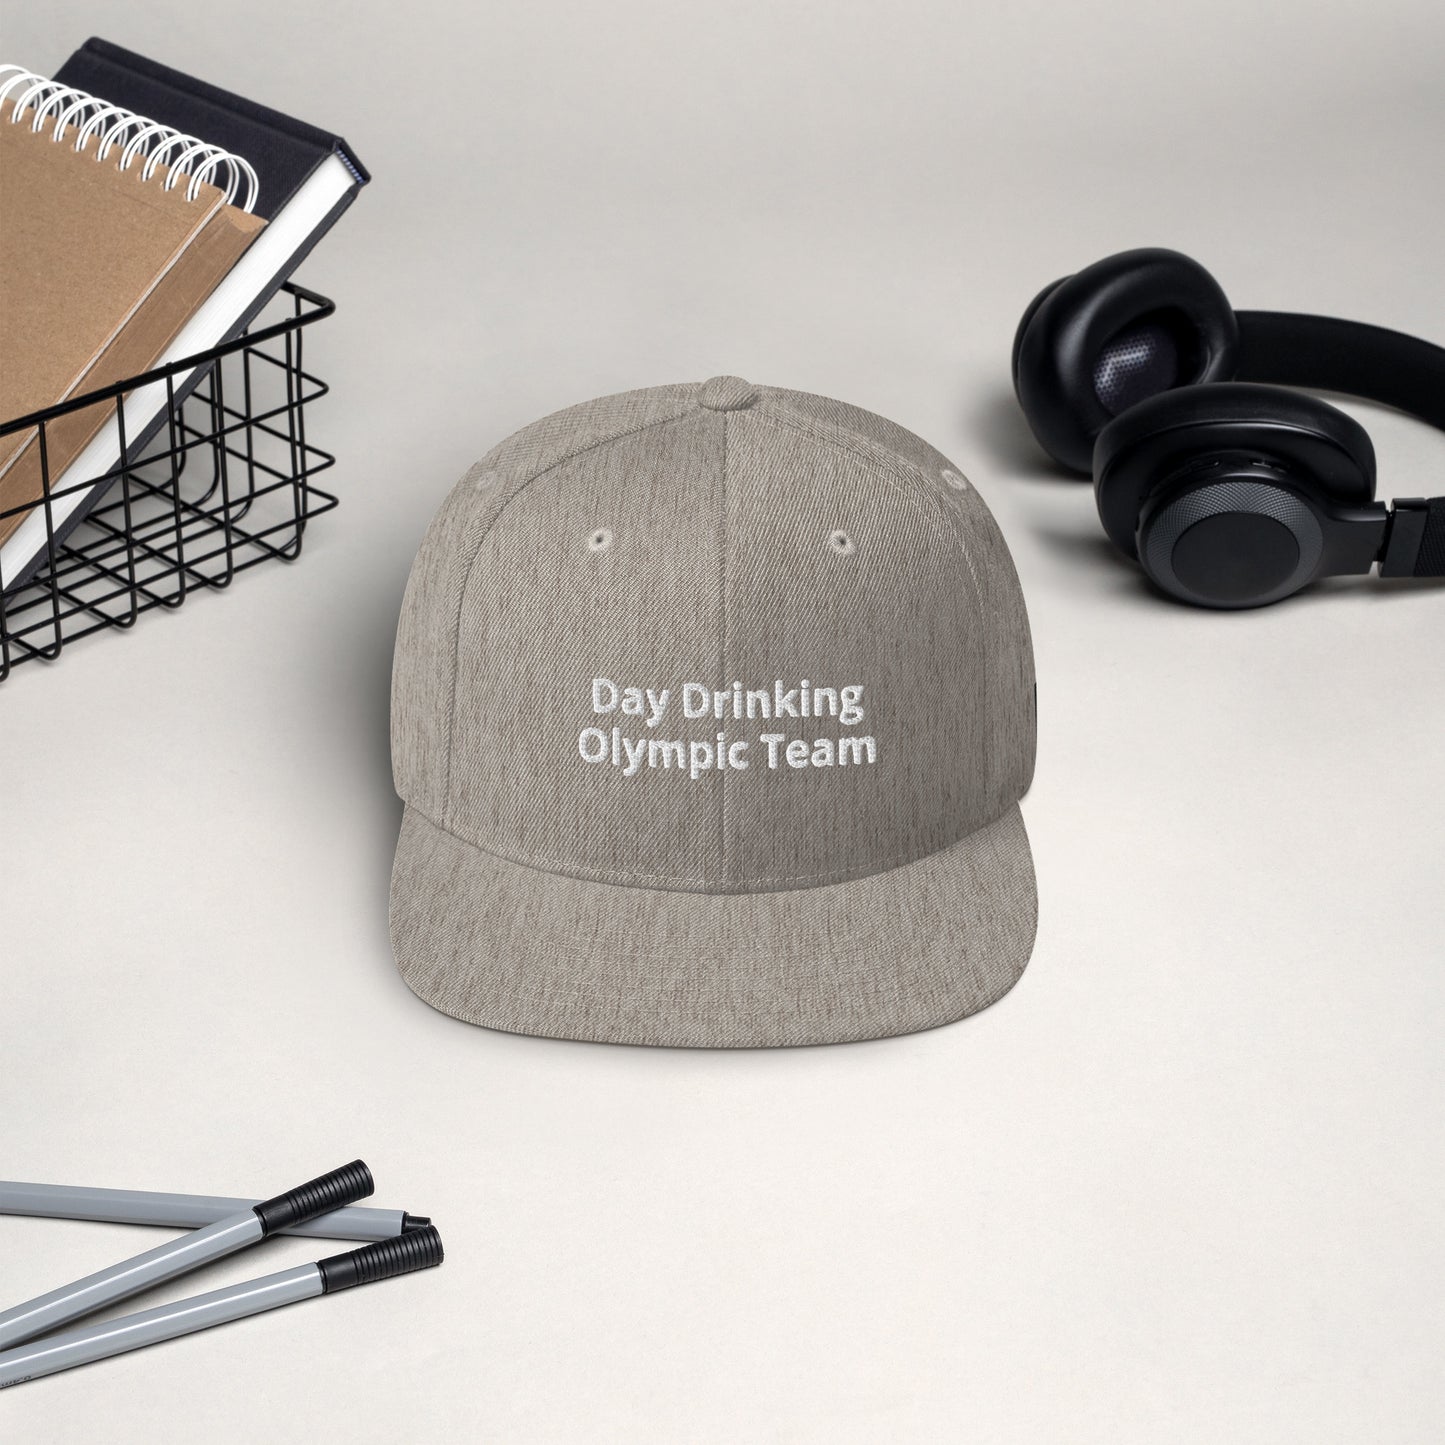 Day Drinking Olympic Team - Snapback Hat